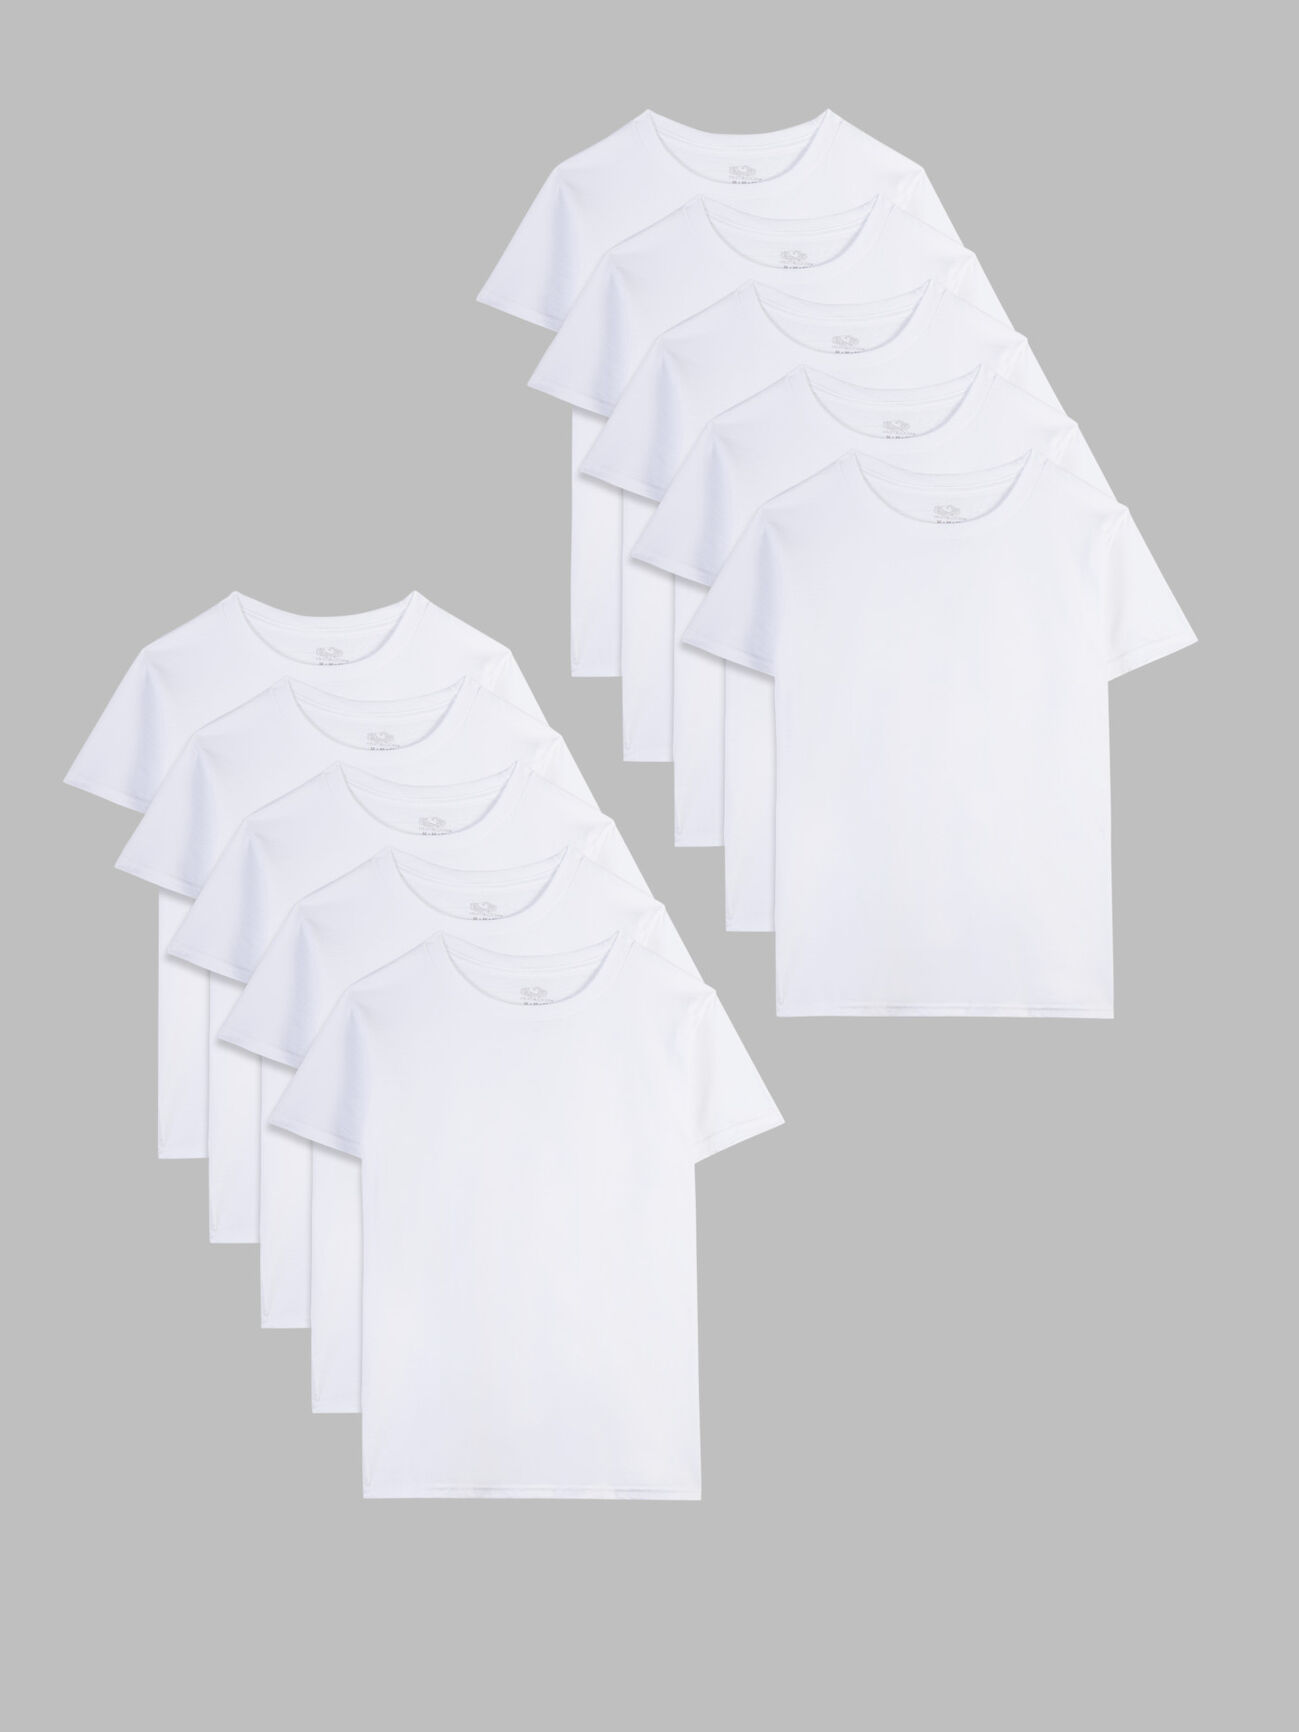 Toddler Boys' Classic White Crew T-Shirts, 10 Pack